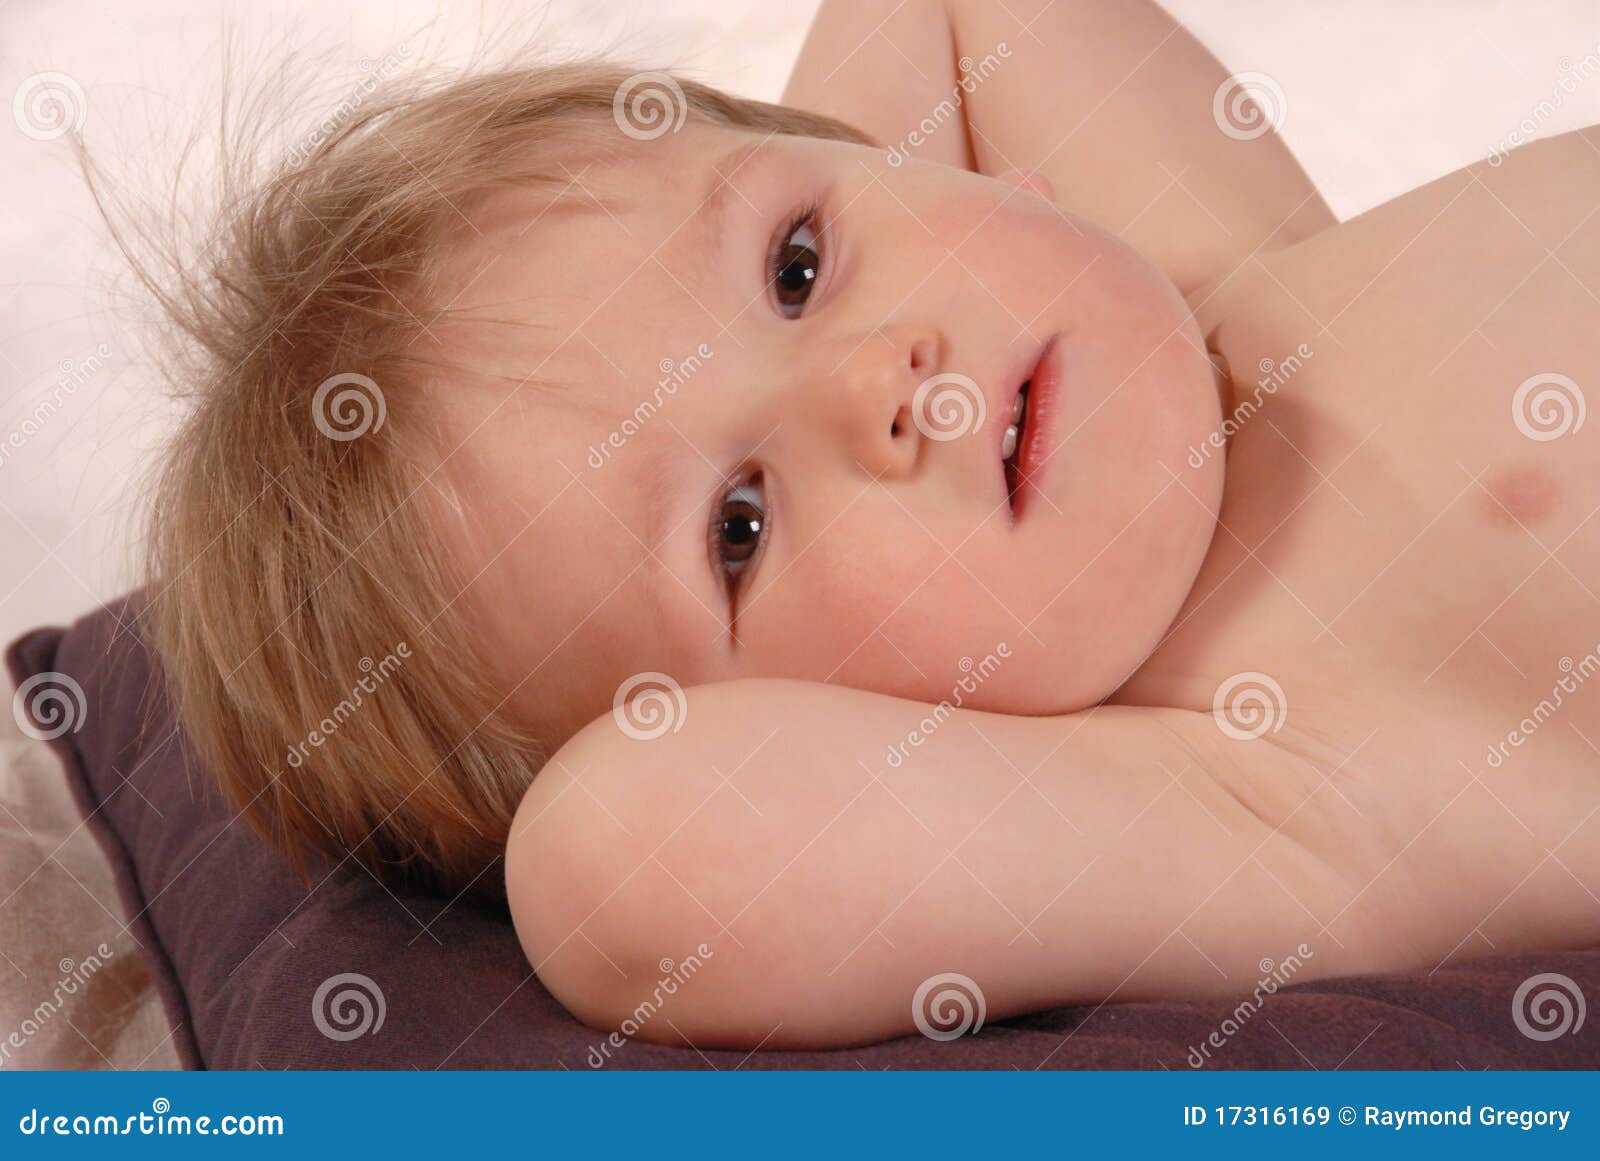 Little Baby Boy Poses for Camera Laying on Pillow Stock Image - Image of  hair, cute: 17316169